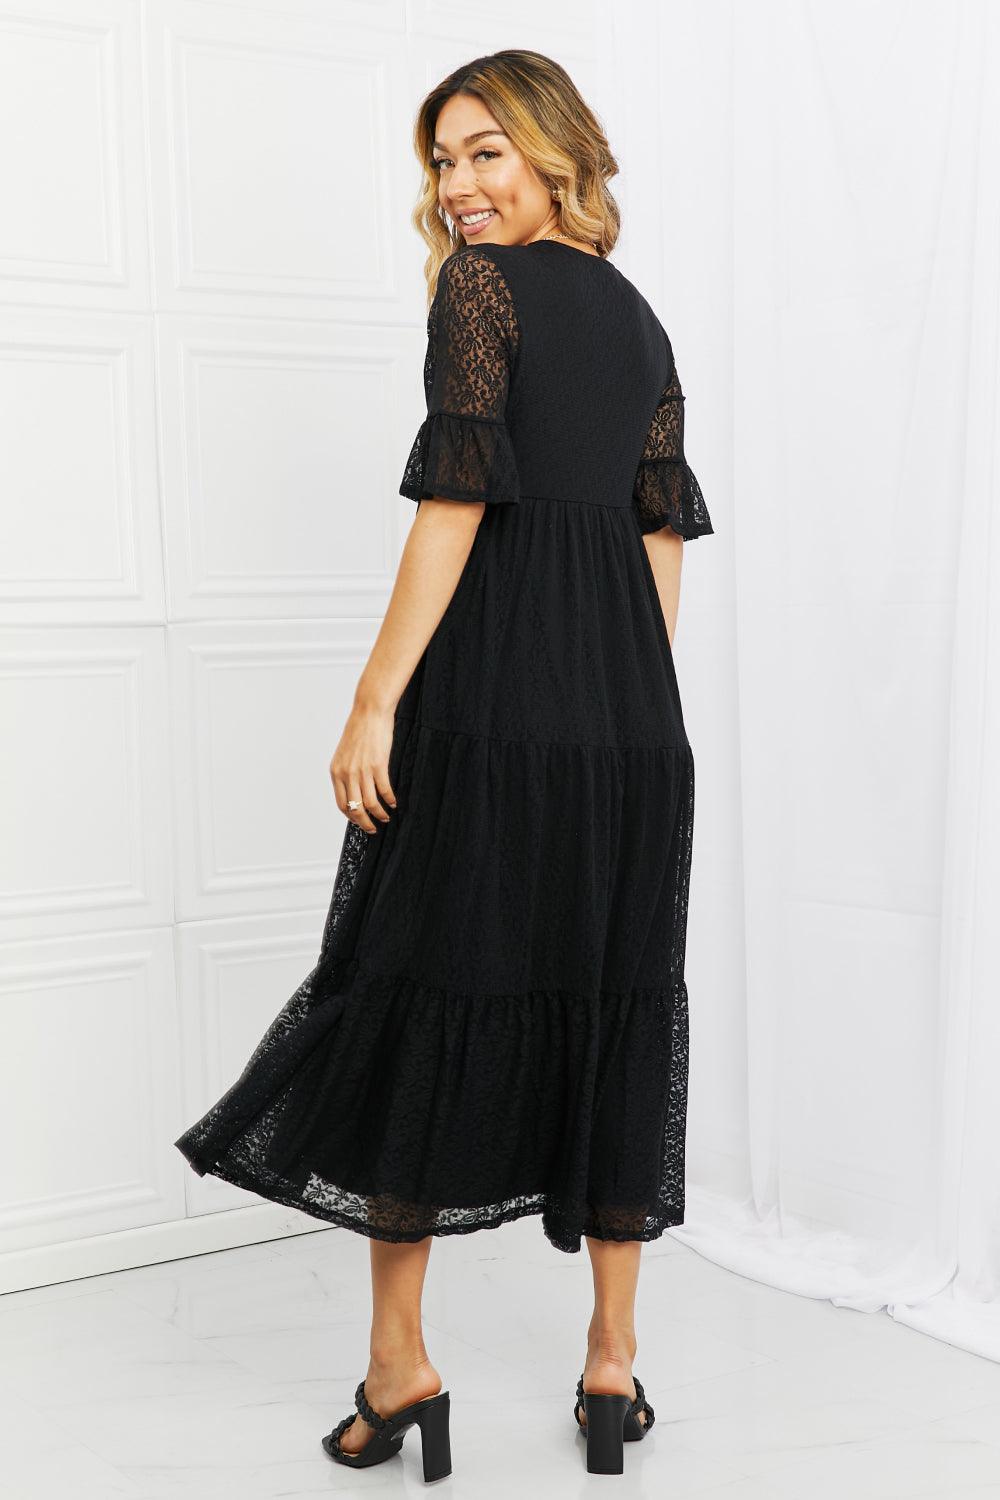 Women's Dresses Lovely Lace Black Tiered Dress